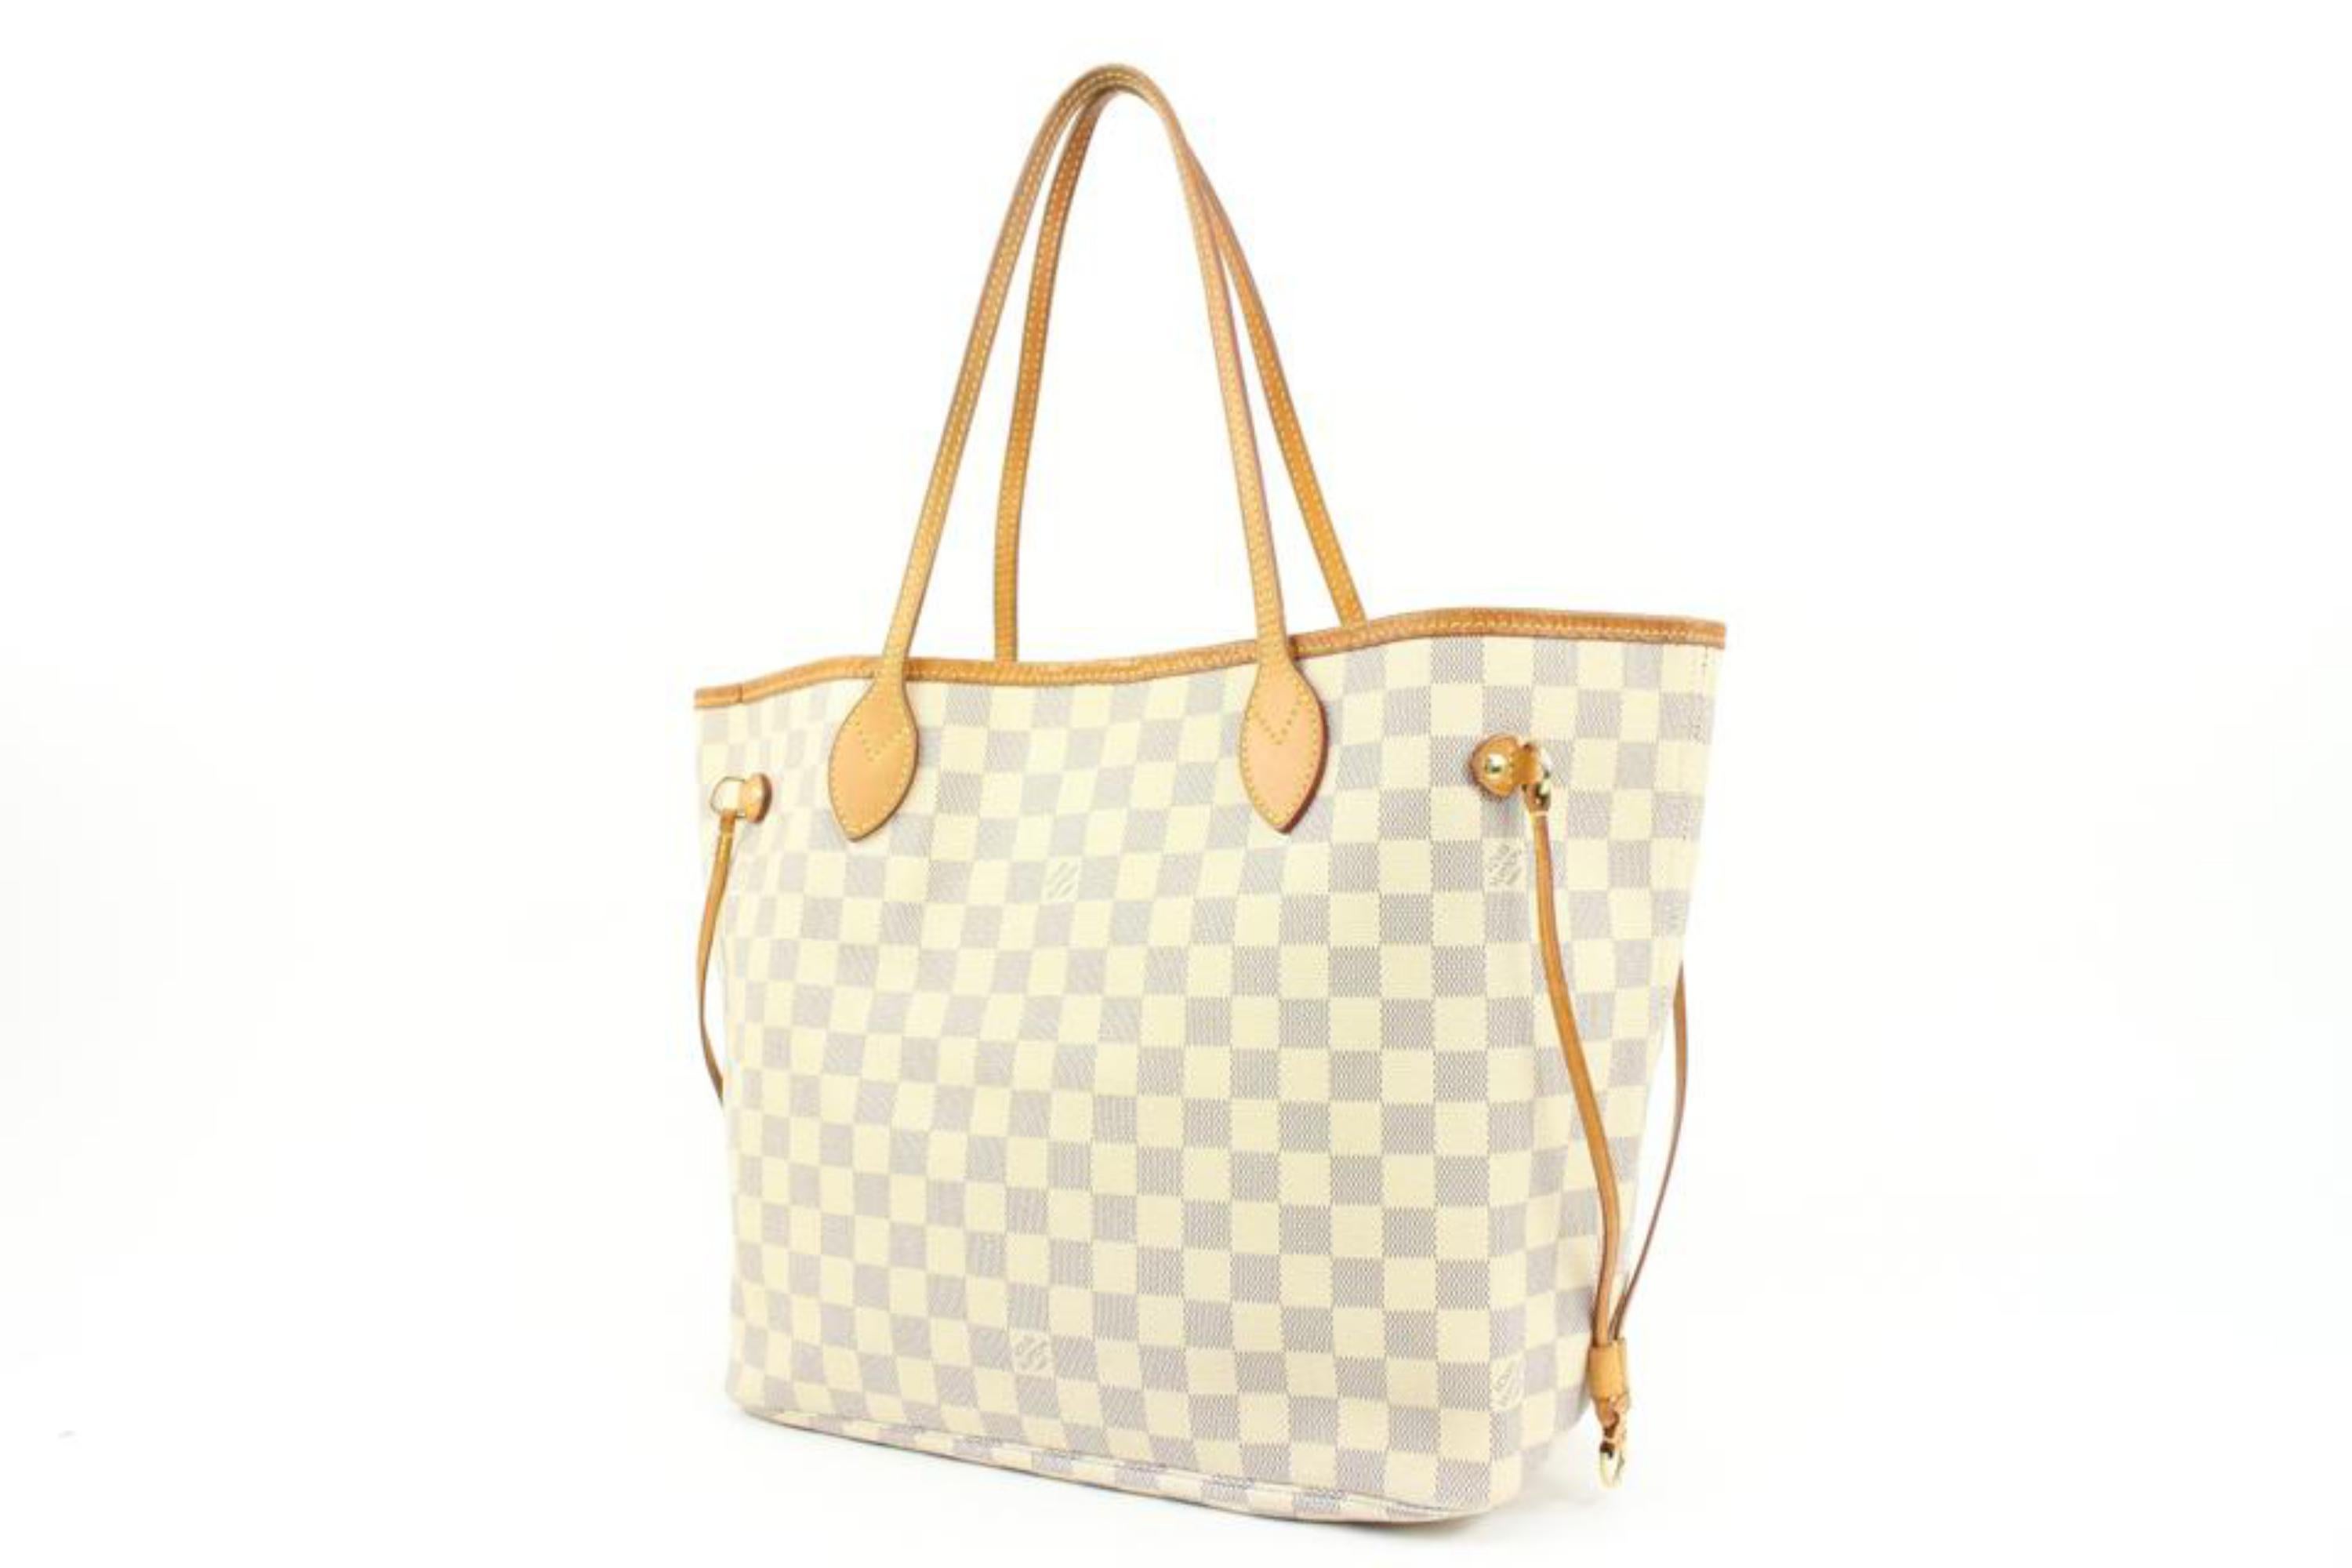 Louis Vuitton Damier Azur Neverfull MM Tote Bag s29lv28
Date Code/Serial Number: SP4110
Made In: France
Measurements: Length:  18.5